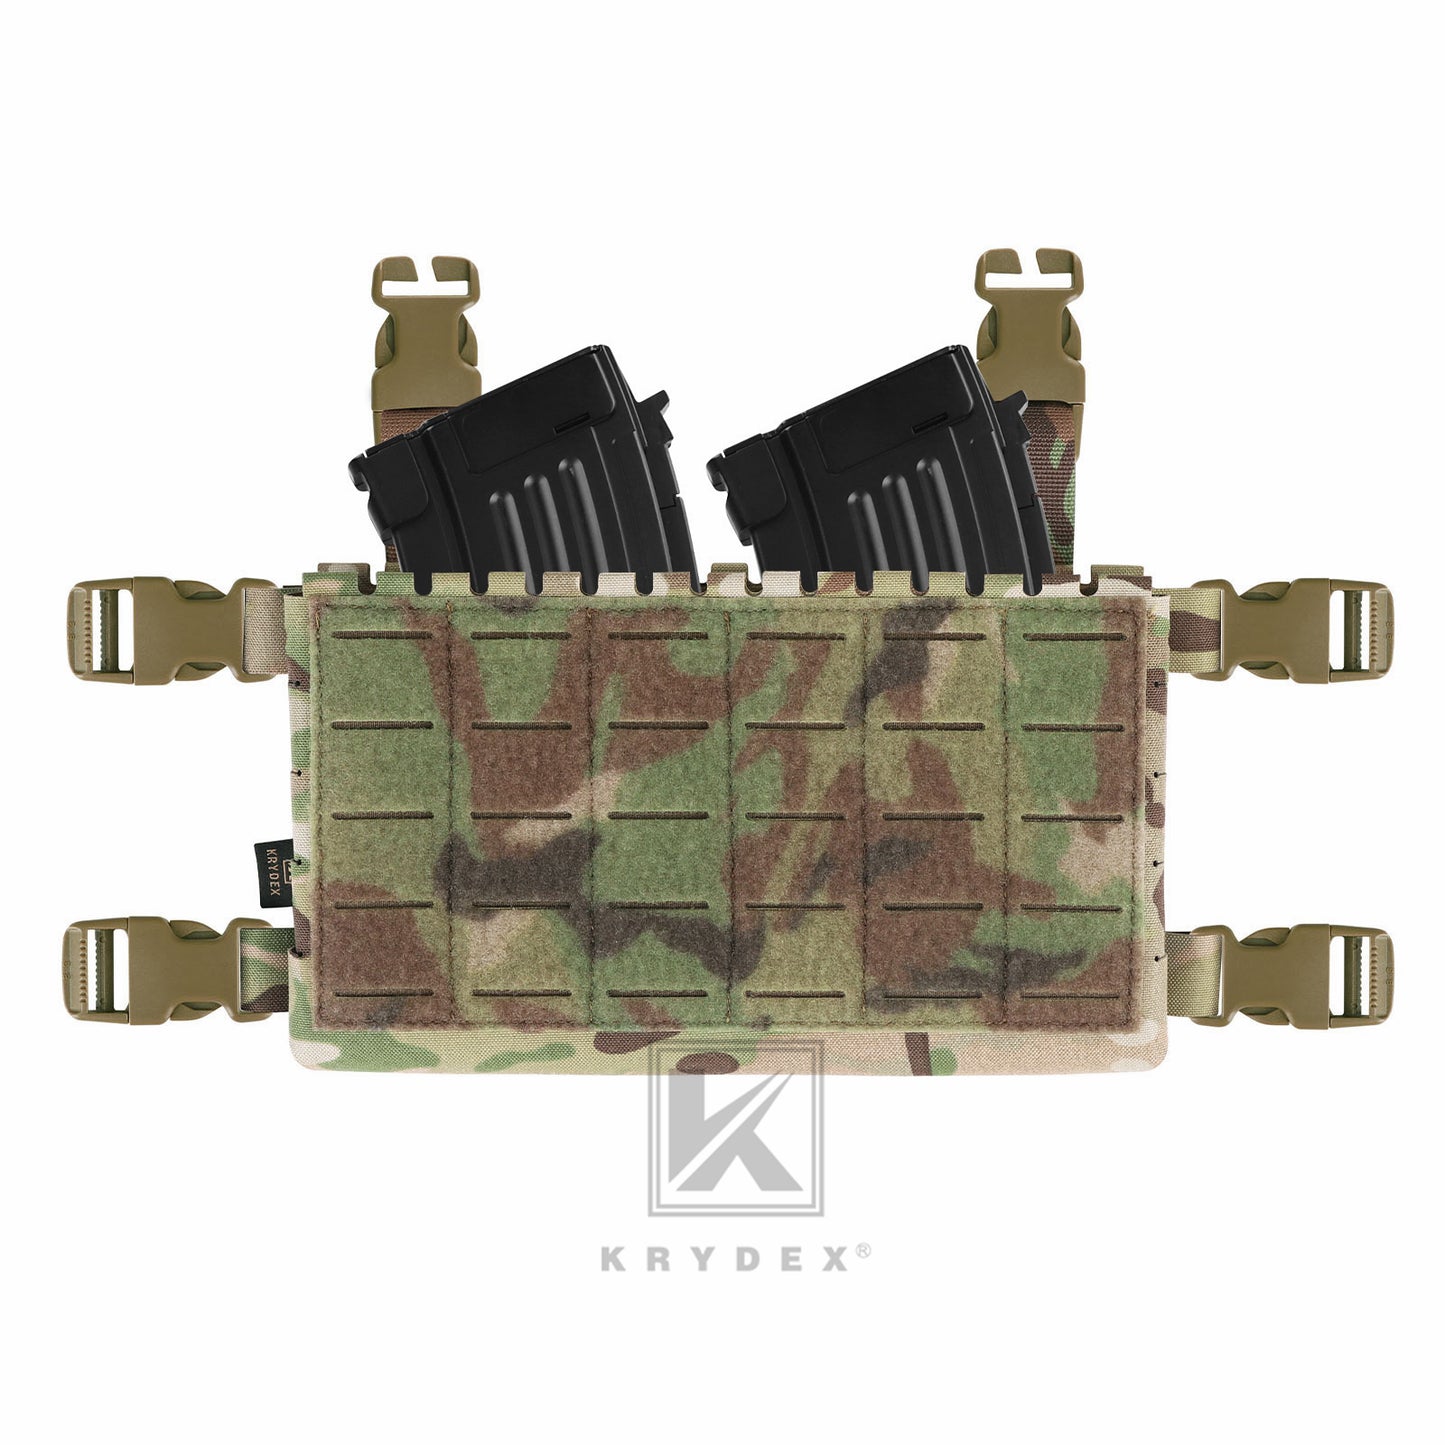 Krydex Tactical MK5 Micro Fight Chassis Laser Cut Chest Rig Lightweight Tactical Vest 5.56 MP7 Magazine Placard